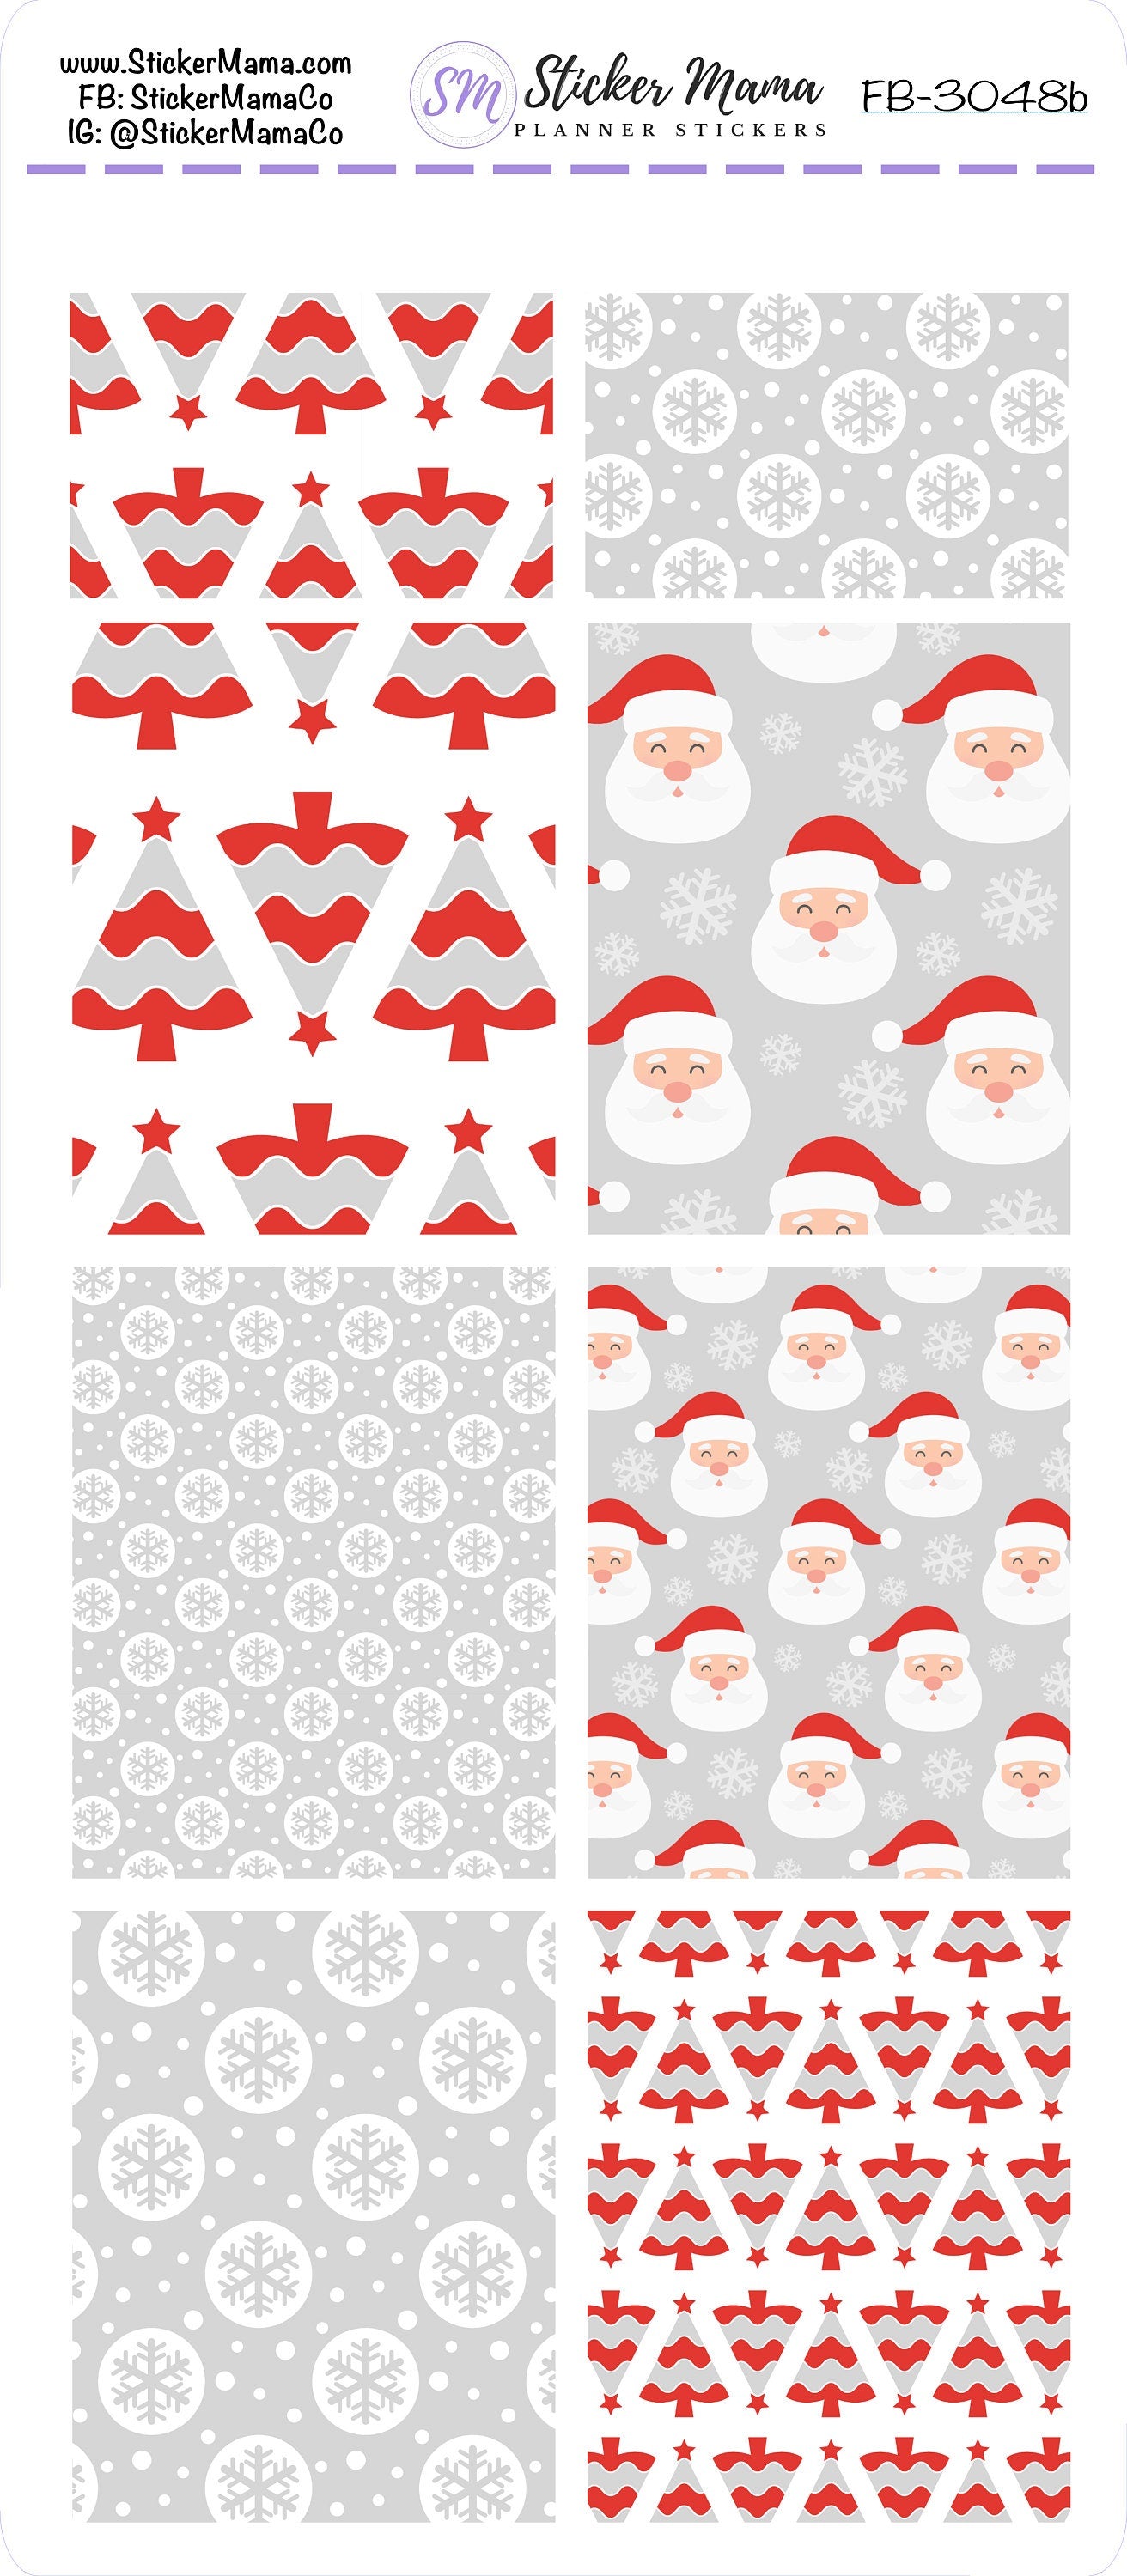 FB-3048 - FULL BOX Stickers - New Christmas - Planner Stickers - Full Box for Planners